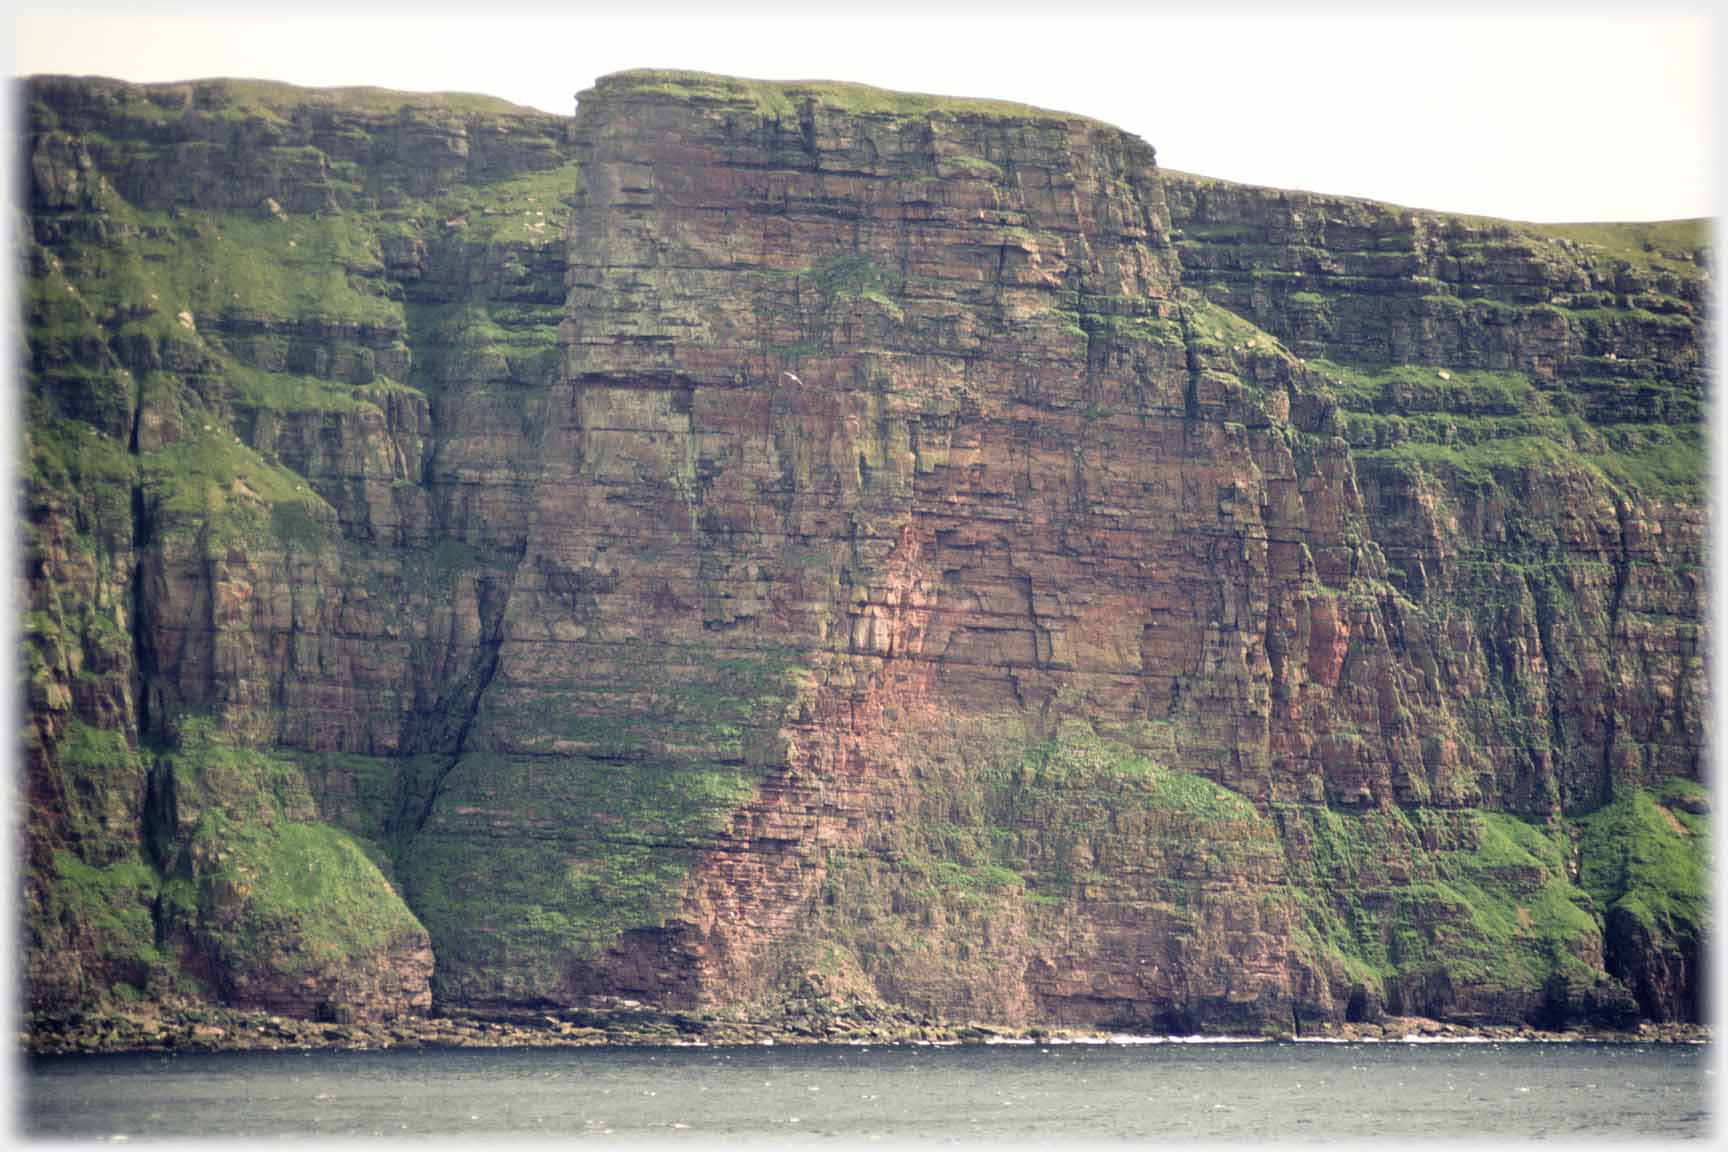 Massive bastion standing out from cliff face above sea.